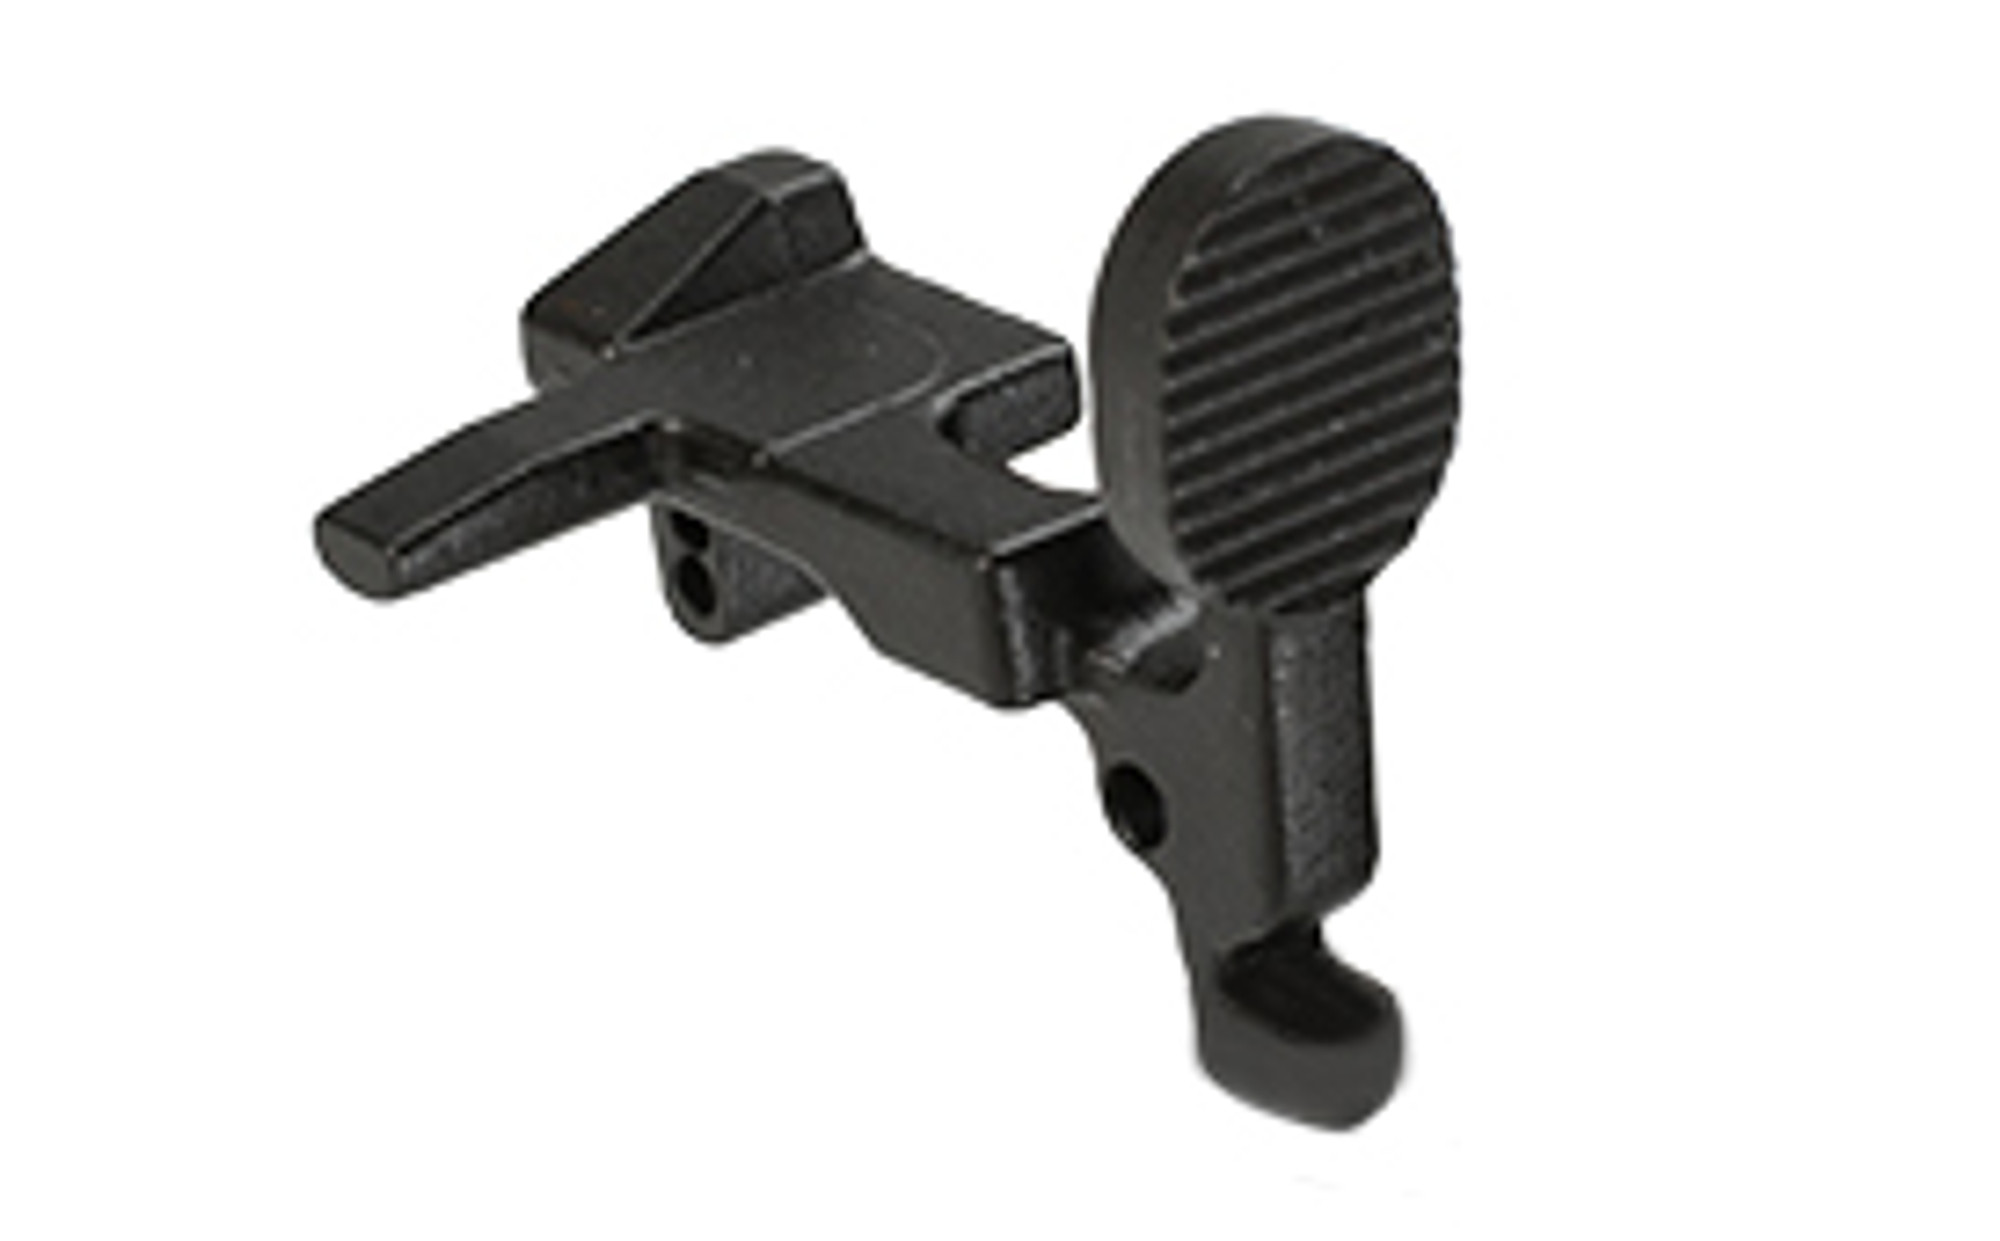 RA-Tech NewAge Steel Bolt Catch for KWA M4 Series Airsoft GBB Rifles